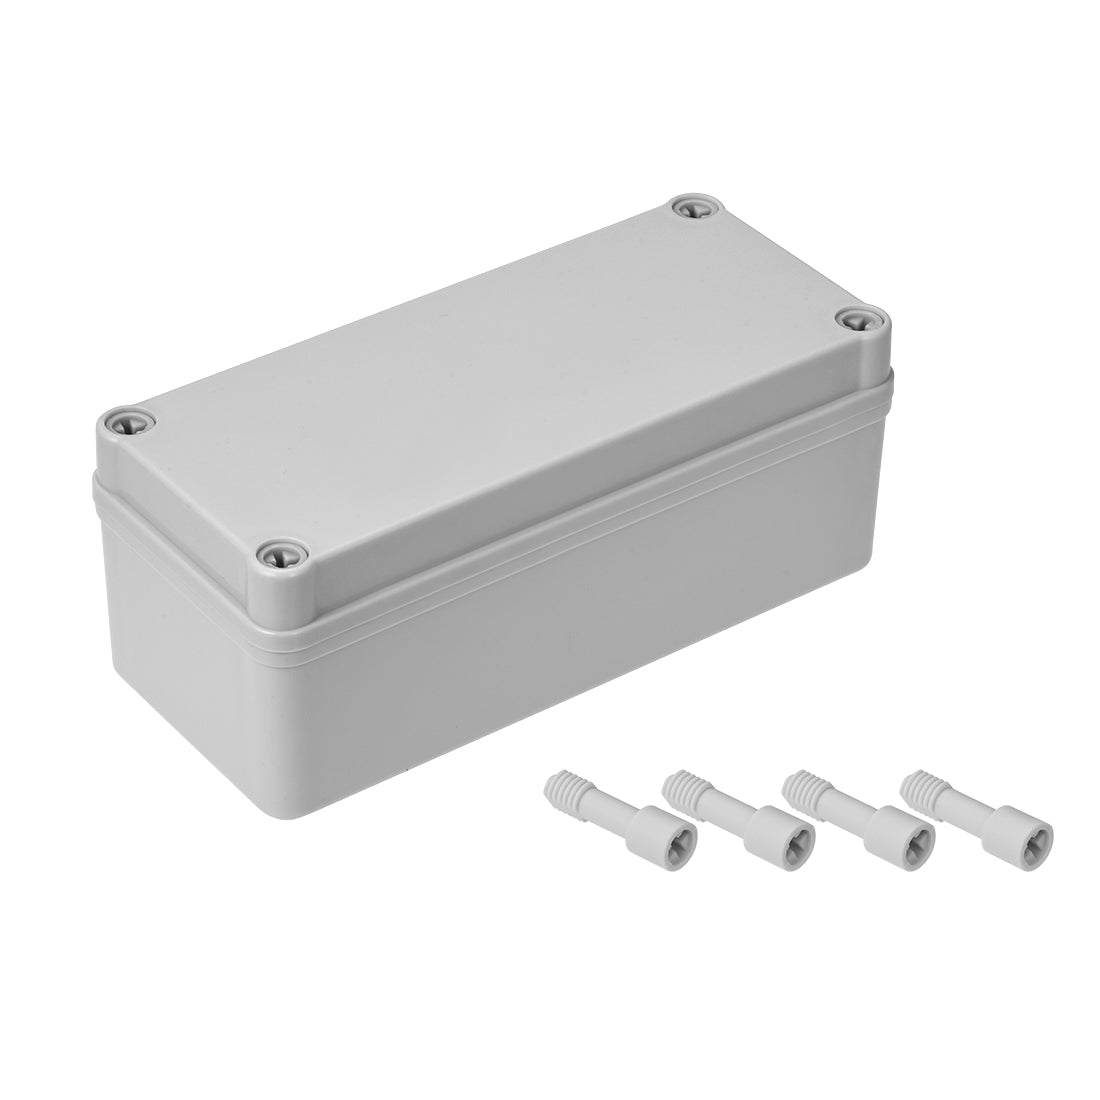 uxcell Uxcell 180mmx80mmx70mm Dustproof IP65 Junction Box DIY Case Enclosure Gray